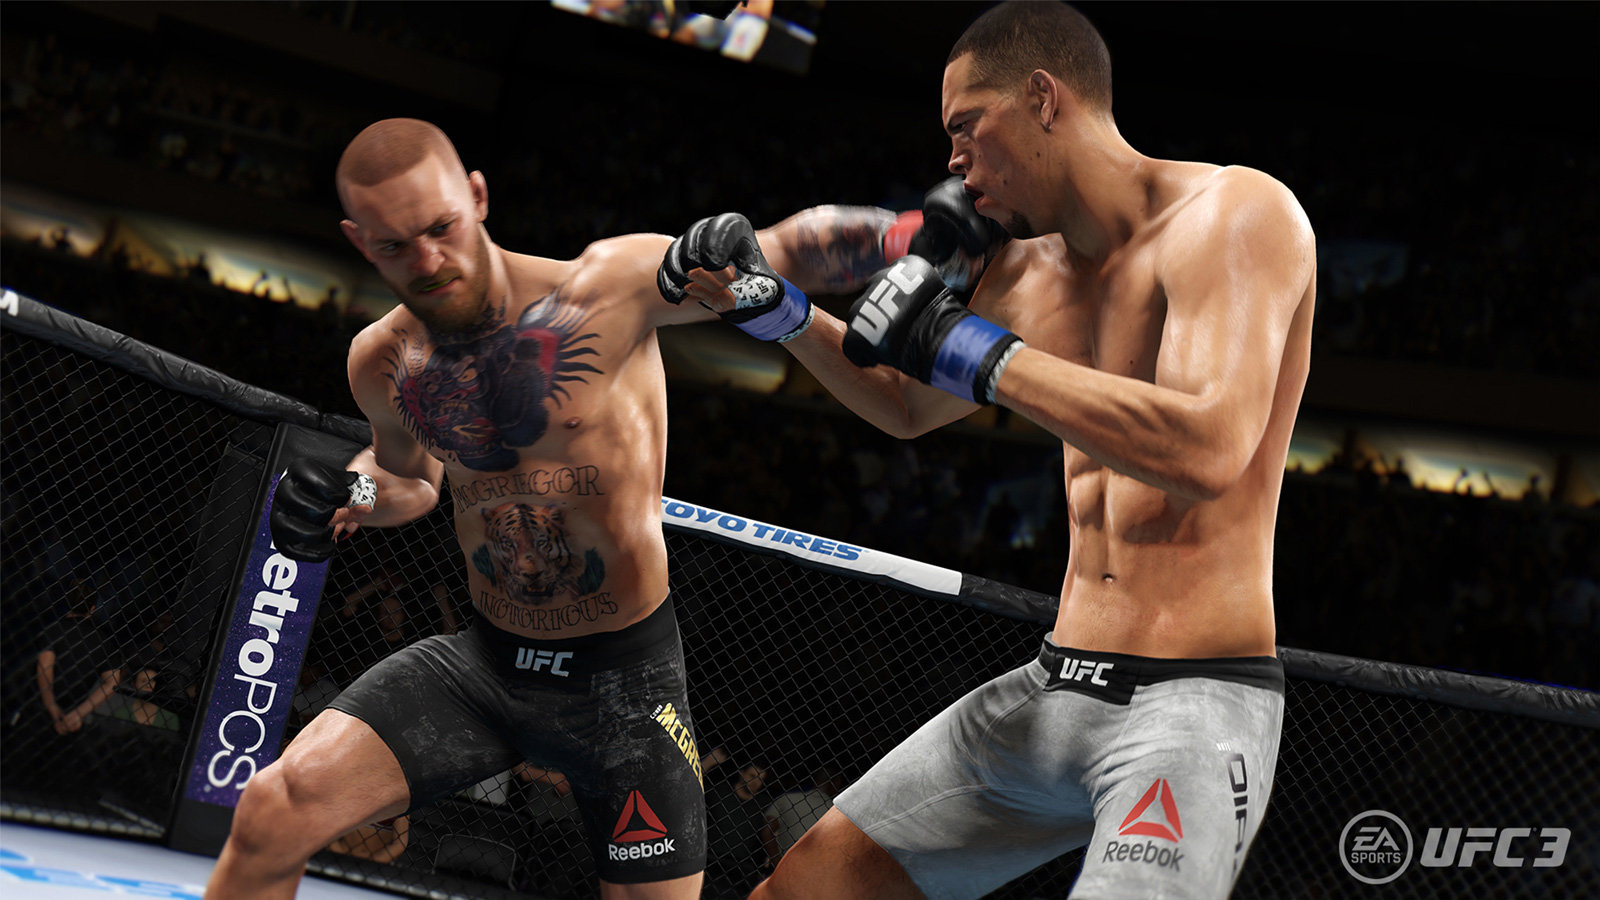 Ea S Ufc Takes The Fight Beyond Octagon